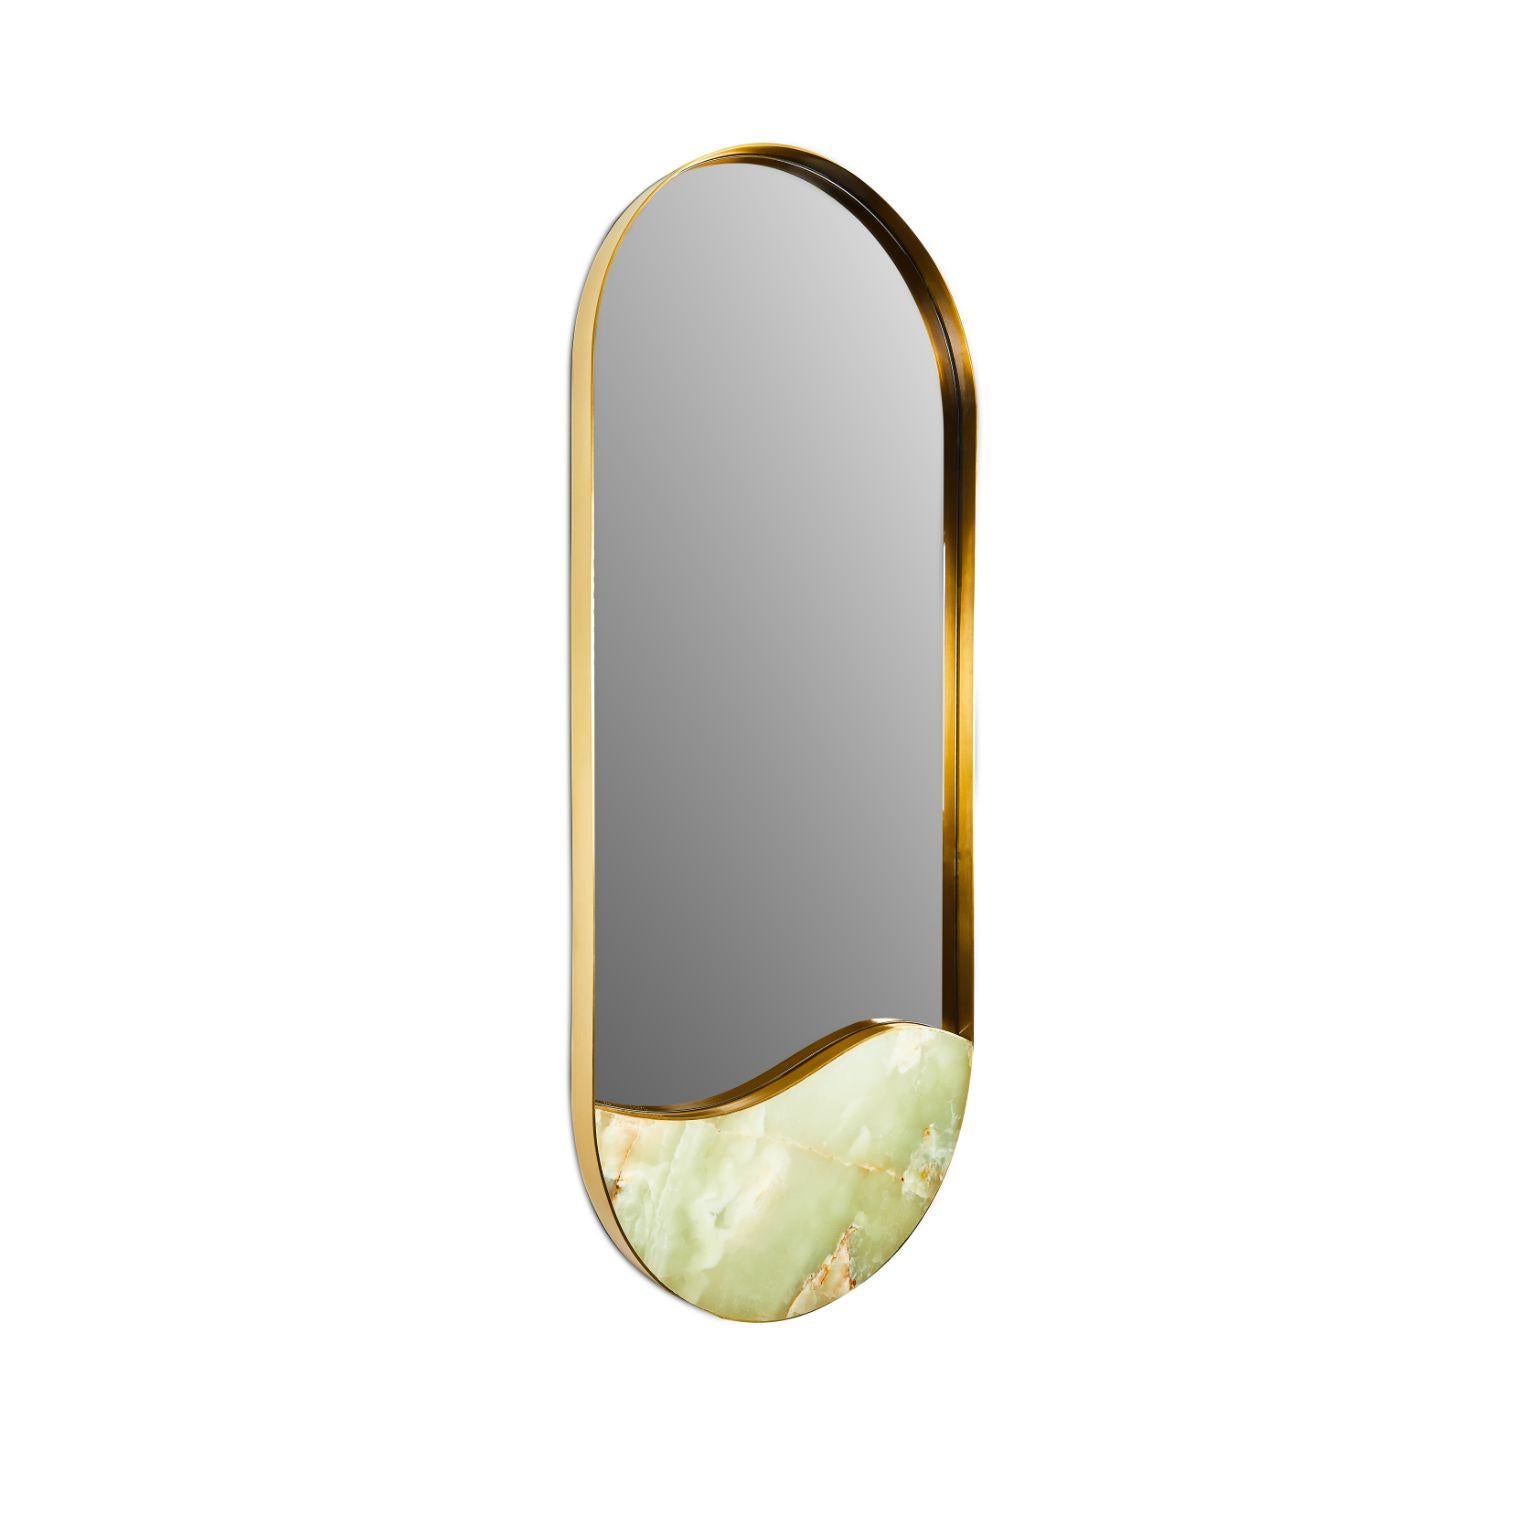 Kura mirror green onyx by Marble Balloon
Dimensions: 120 x 50 x 5 cm 
Materials: Brass, onyx green stone.

100% Brass material is used in the frame and green onyx stone is used in the lower part.

Marble Balloon is an interior design and high